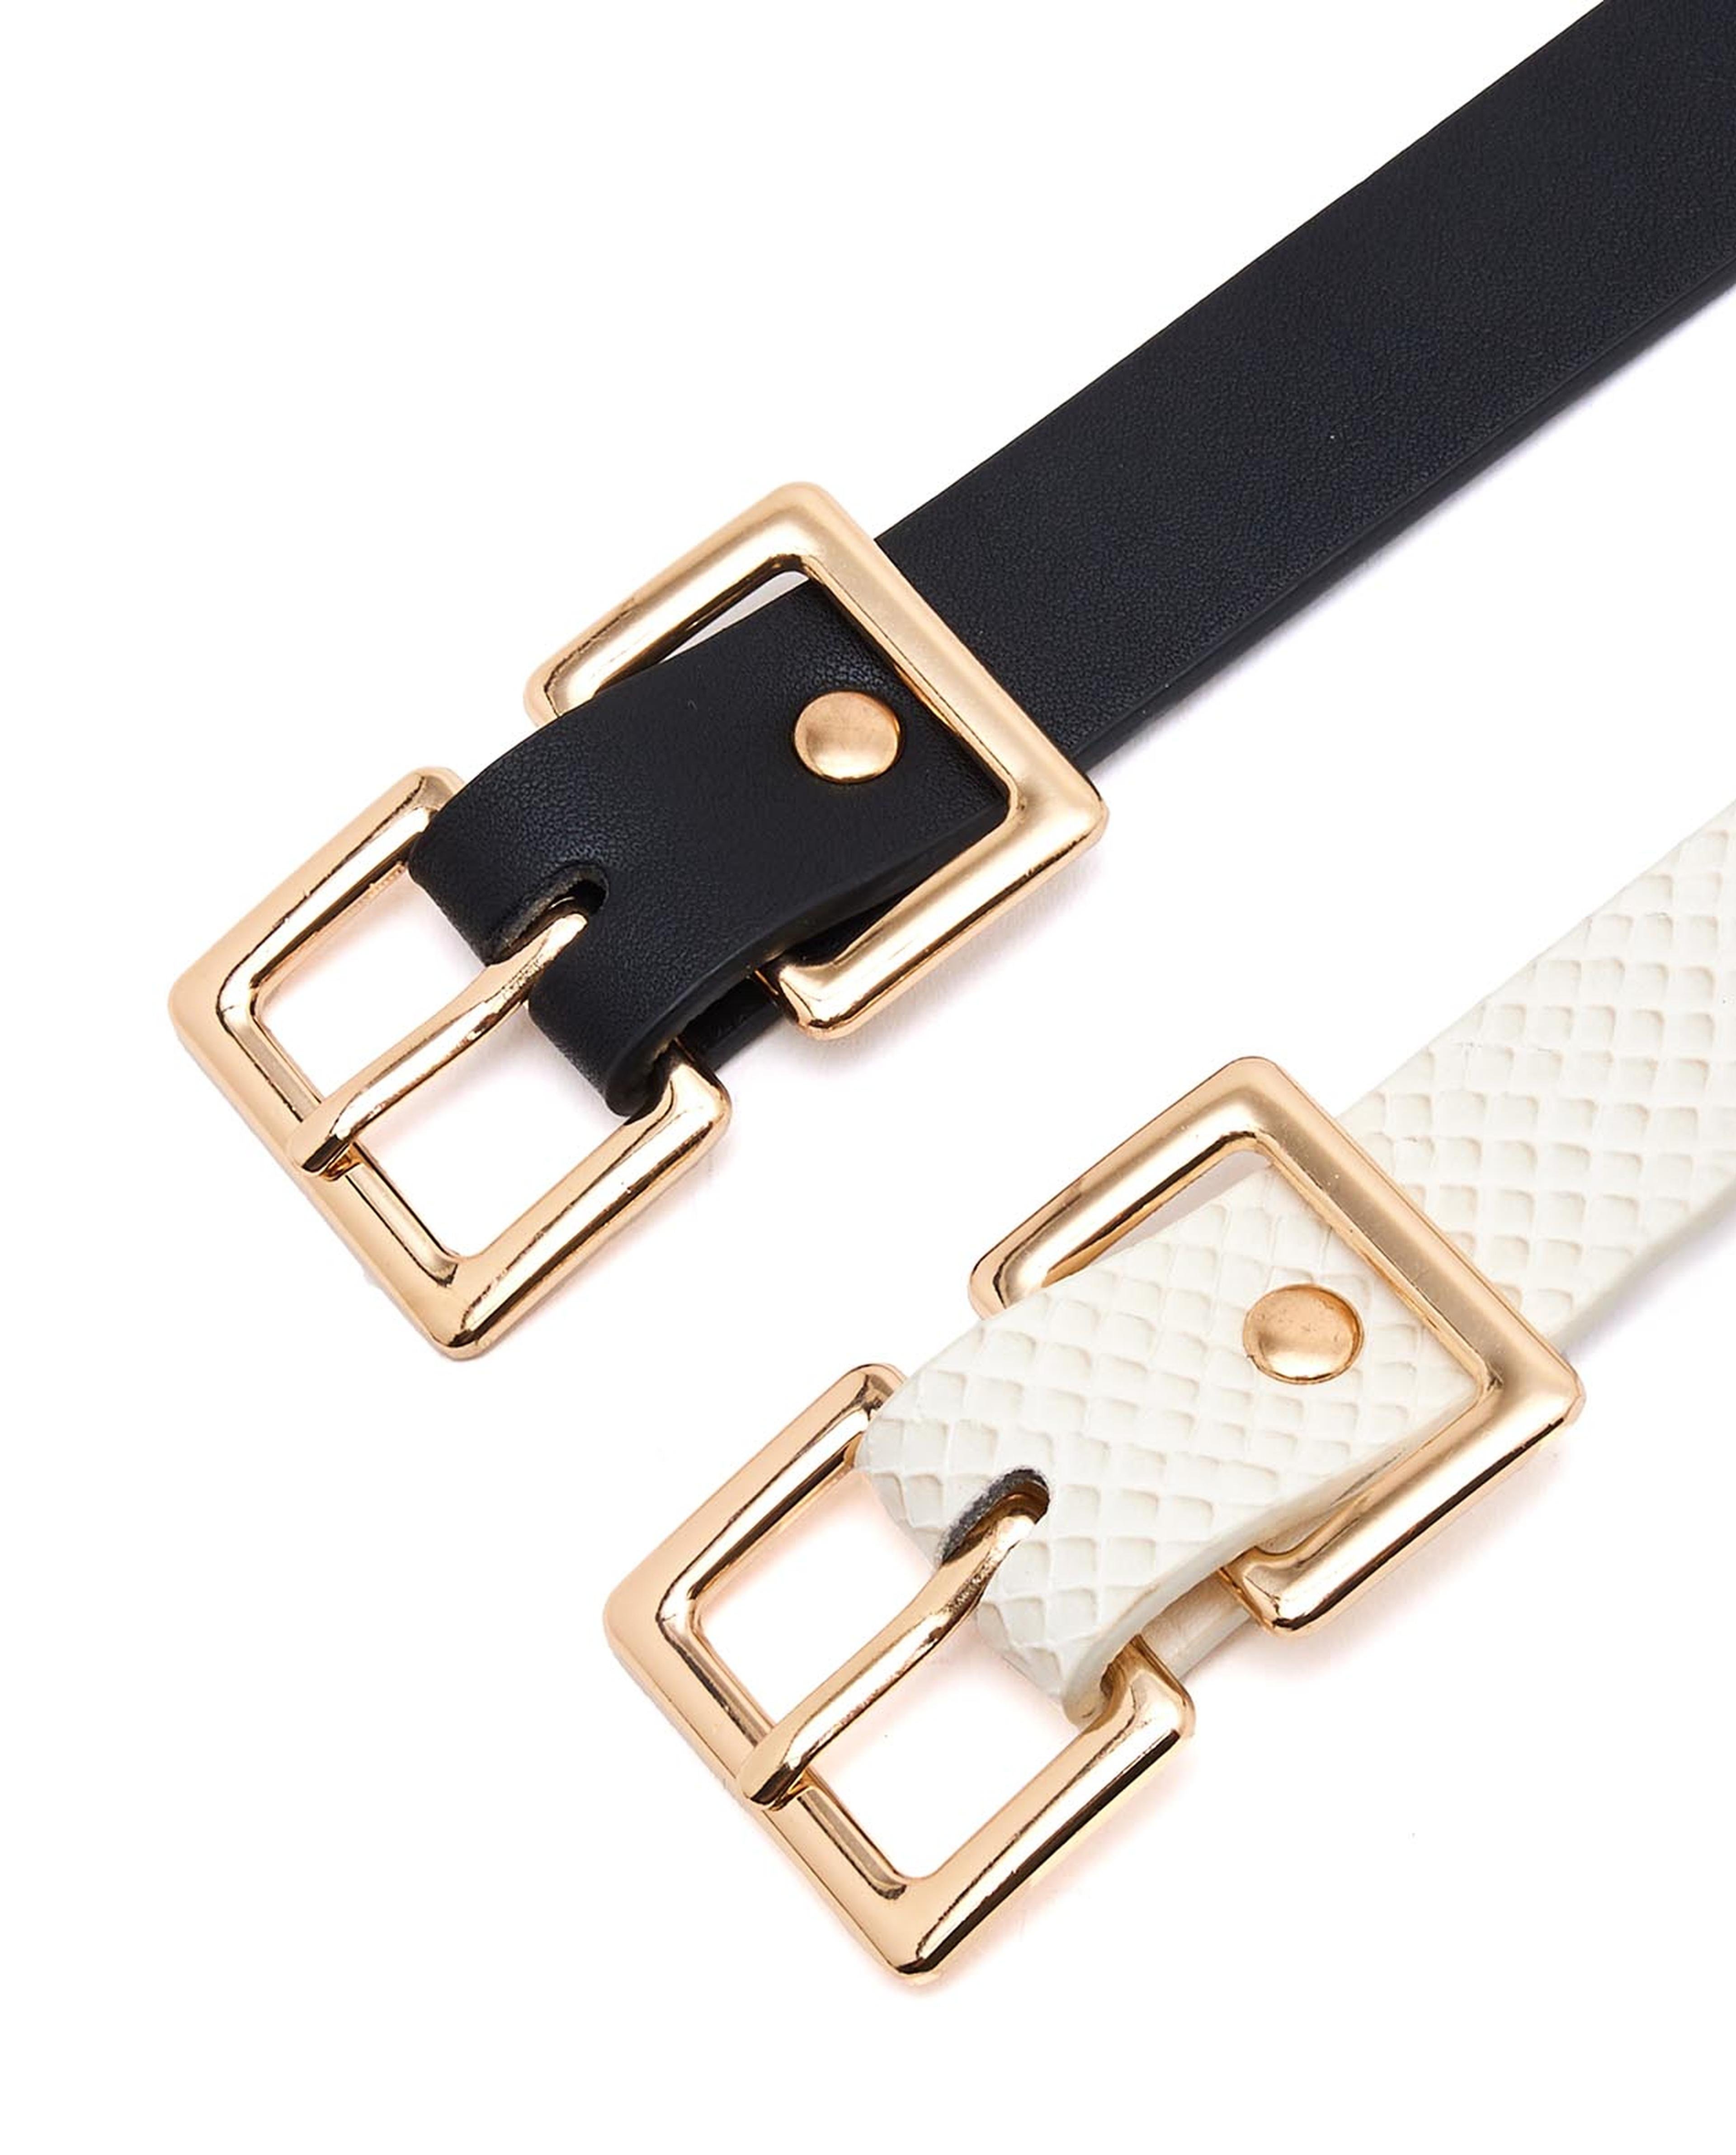 Pack of 2 Buckle Belts